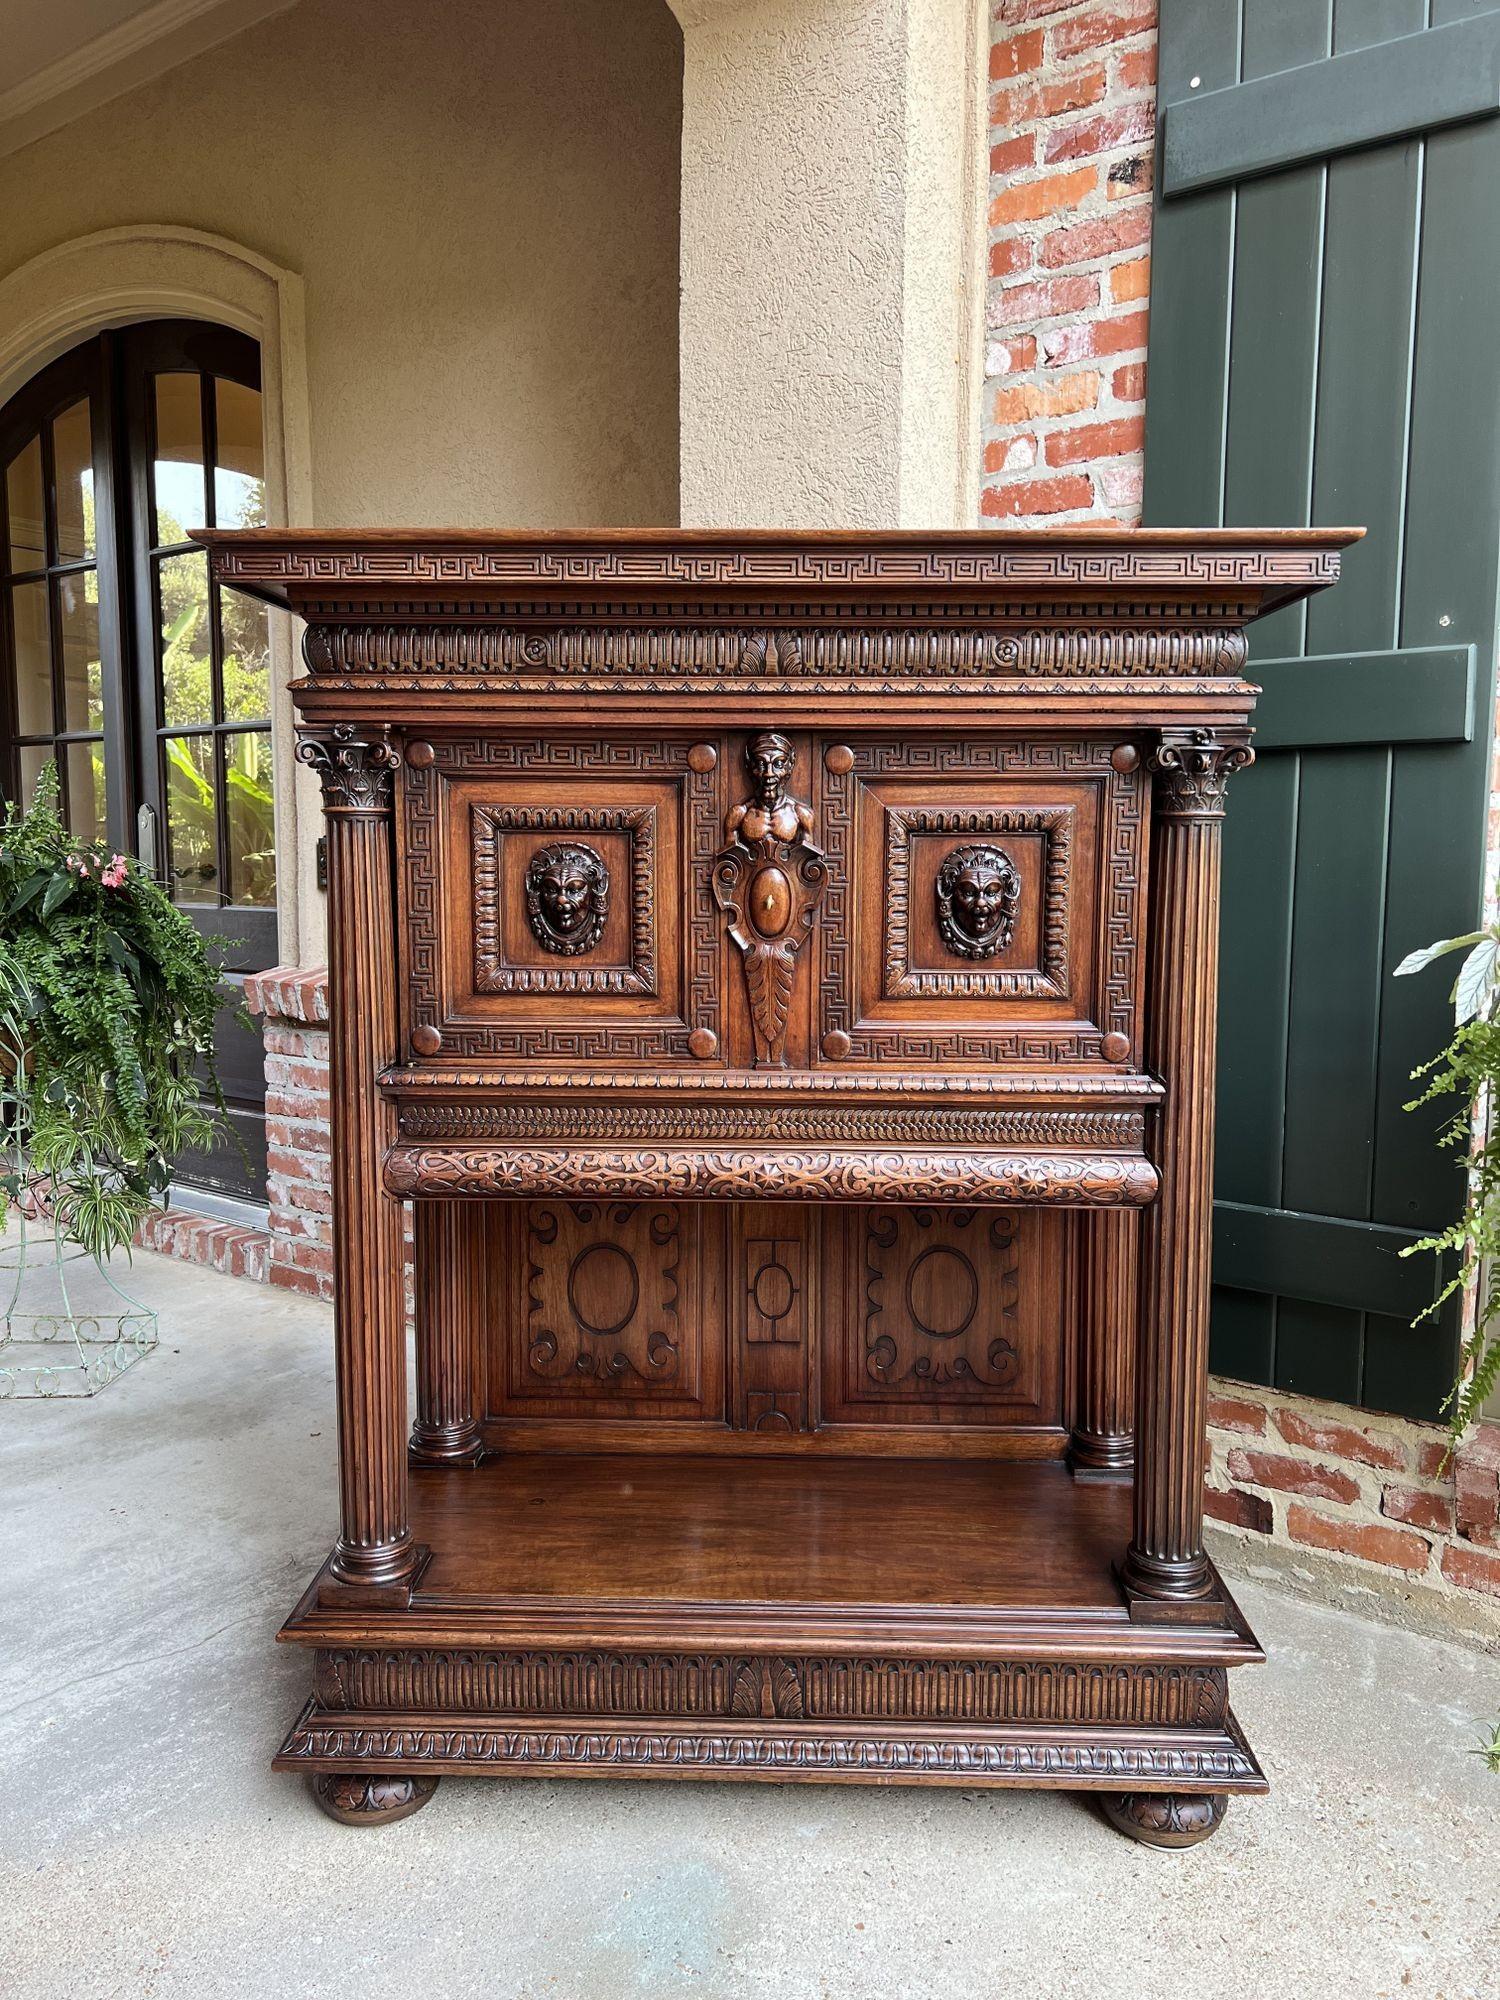 19th century French cabinet wine liquor greek key walnut regency sideboard.
 
Direct from France, a superb 19th century cabinet with outstanding Greek influenced carvings and elements throughout!
 
Four oversized, carved Corinthian columns frame the